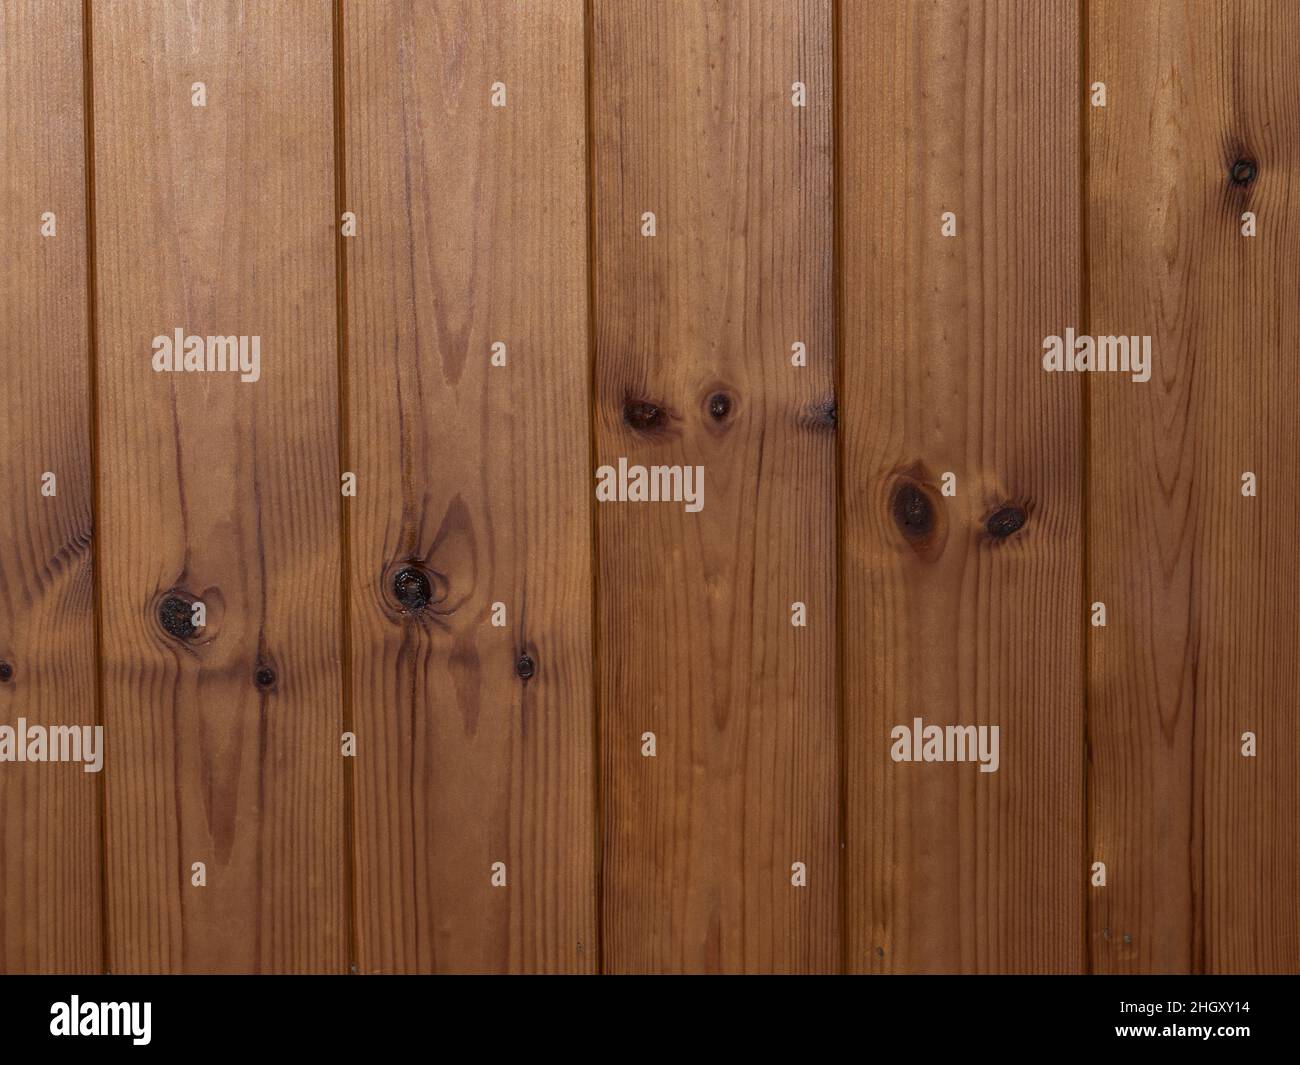 background of wooden boards Stock Photo